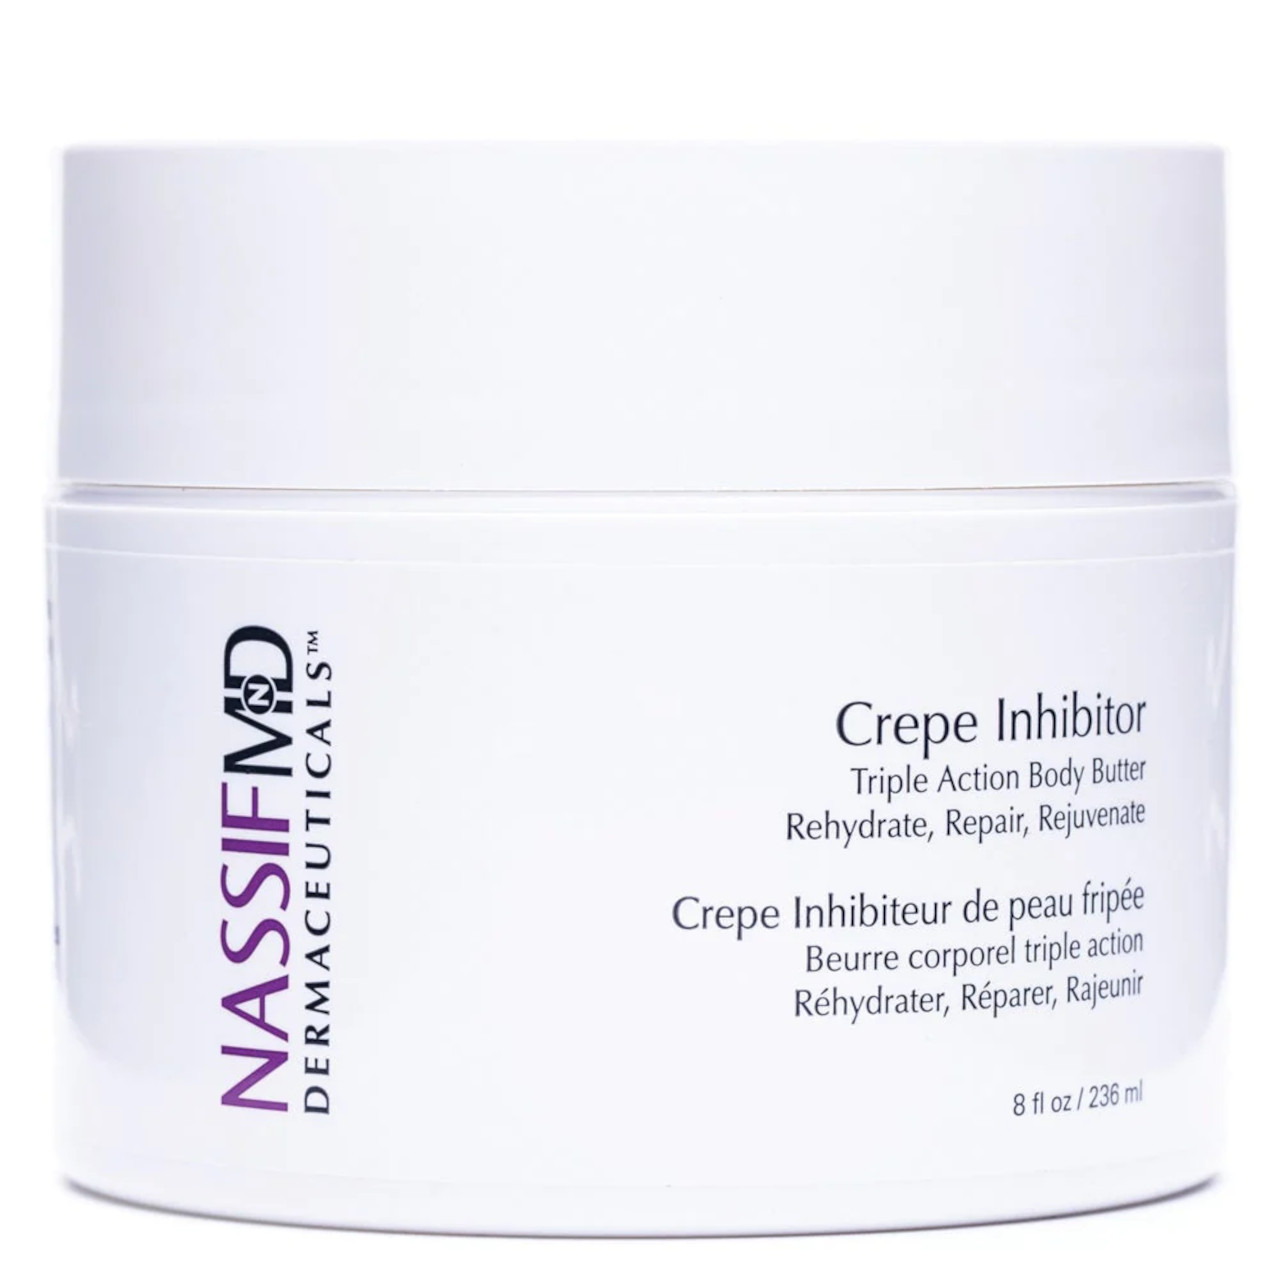 NassifMD Crepe Inhibitor Triple Action Body Butter